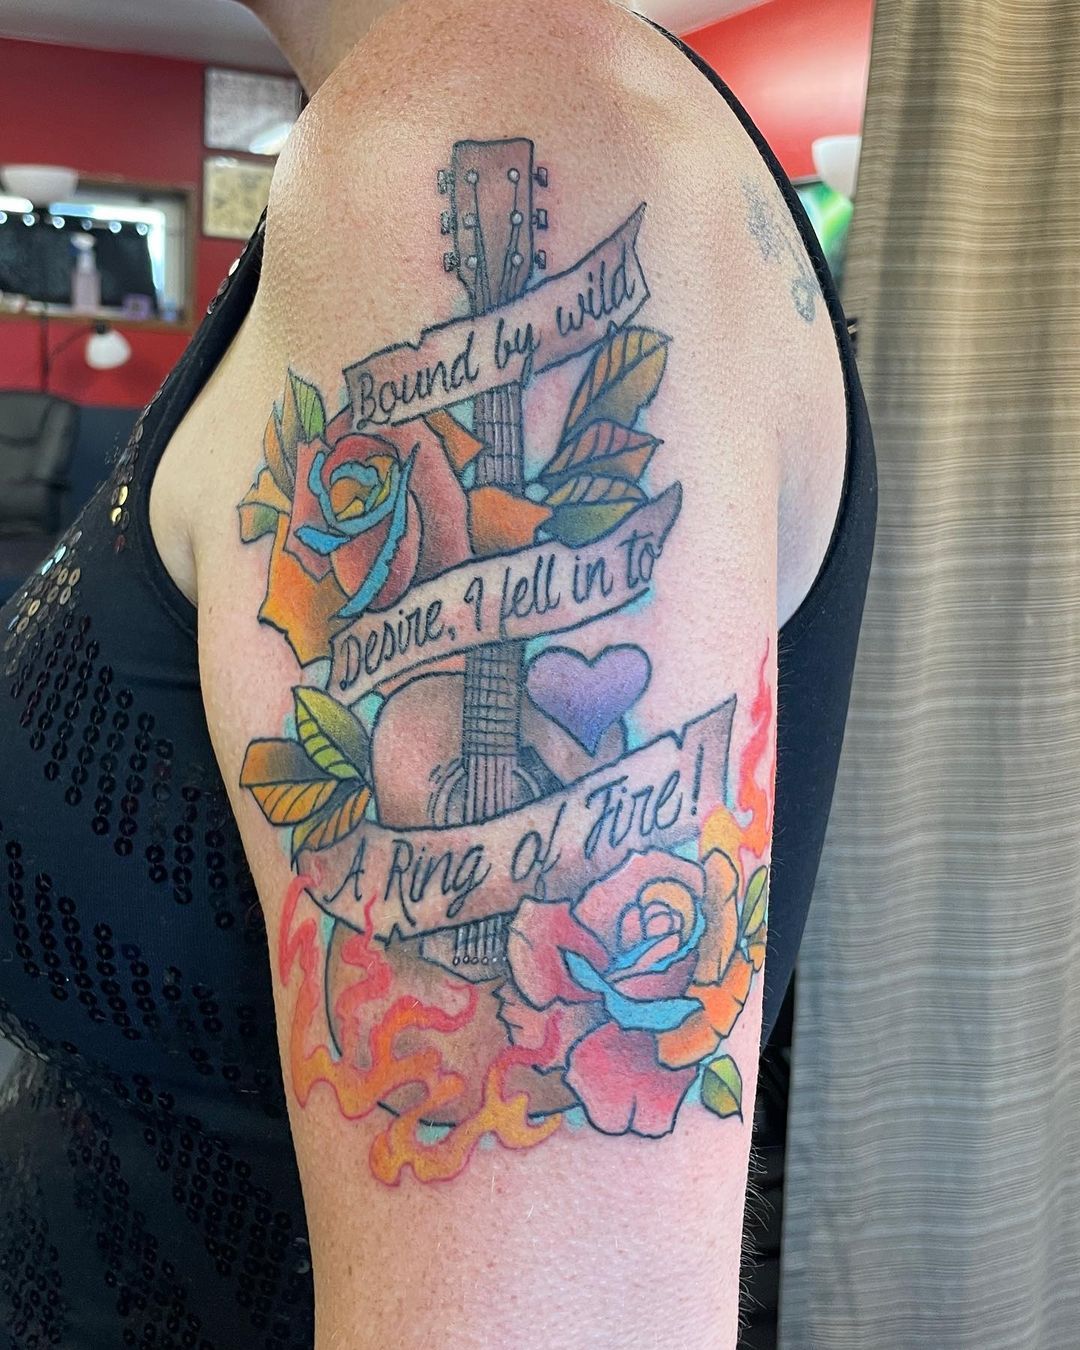 Patrick Mazzone — Finished up this Johnny Cash inspired tattoo for a...